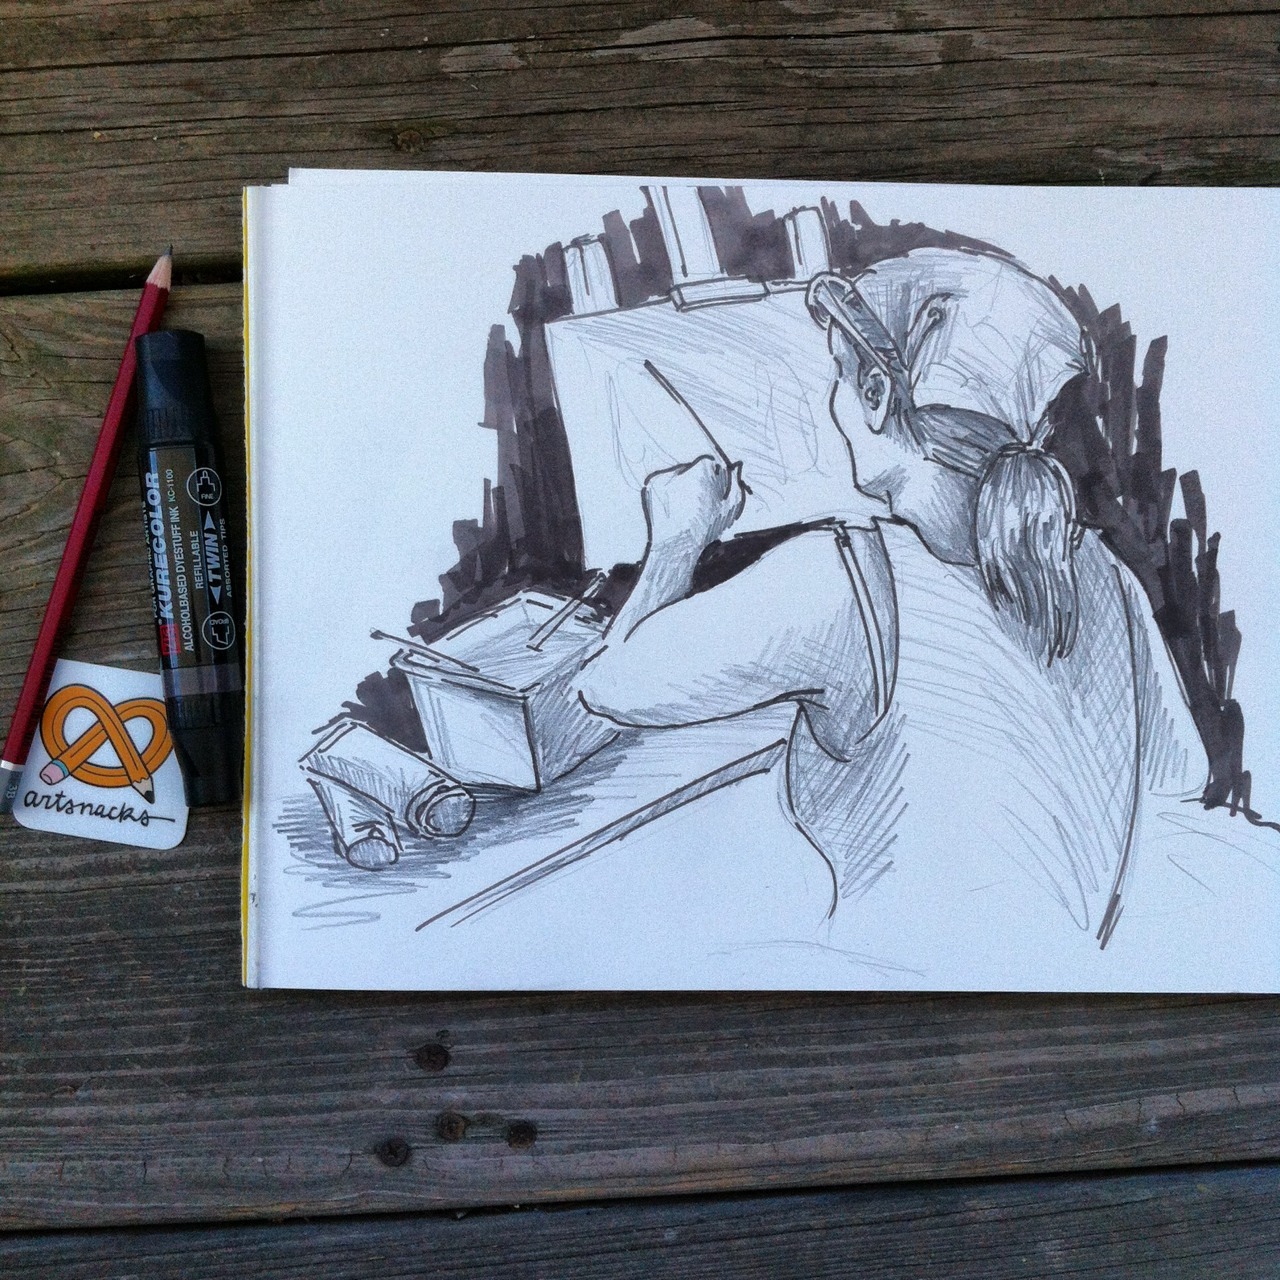 emilyvalenza: sketching and painting session on the deck using cretacolor 3B pencil &amp; zig kurecolor marker in warm grey ArtSnacks is like a magazine subscription but instead of a magazine you get 4 or 5 different art products to try out. Learn more about ArtSnacks here.